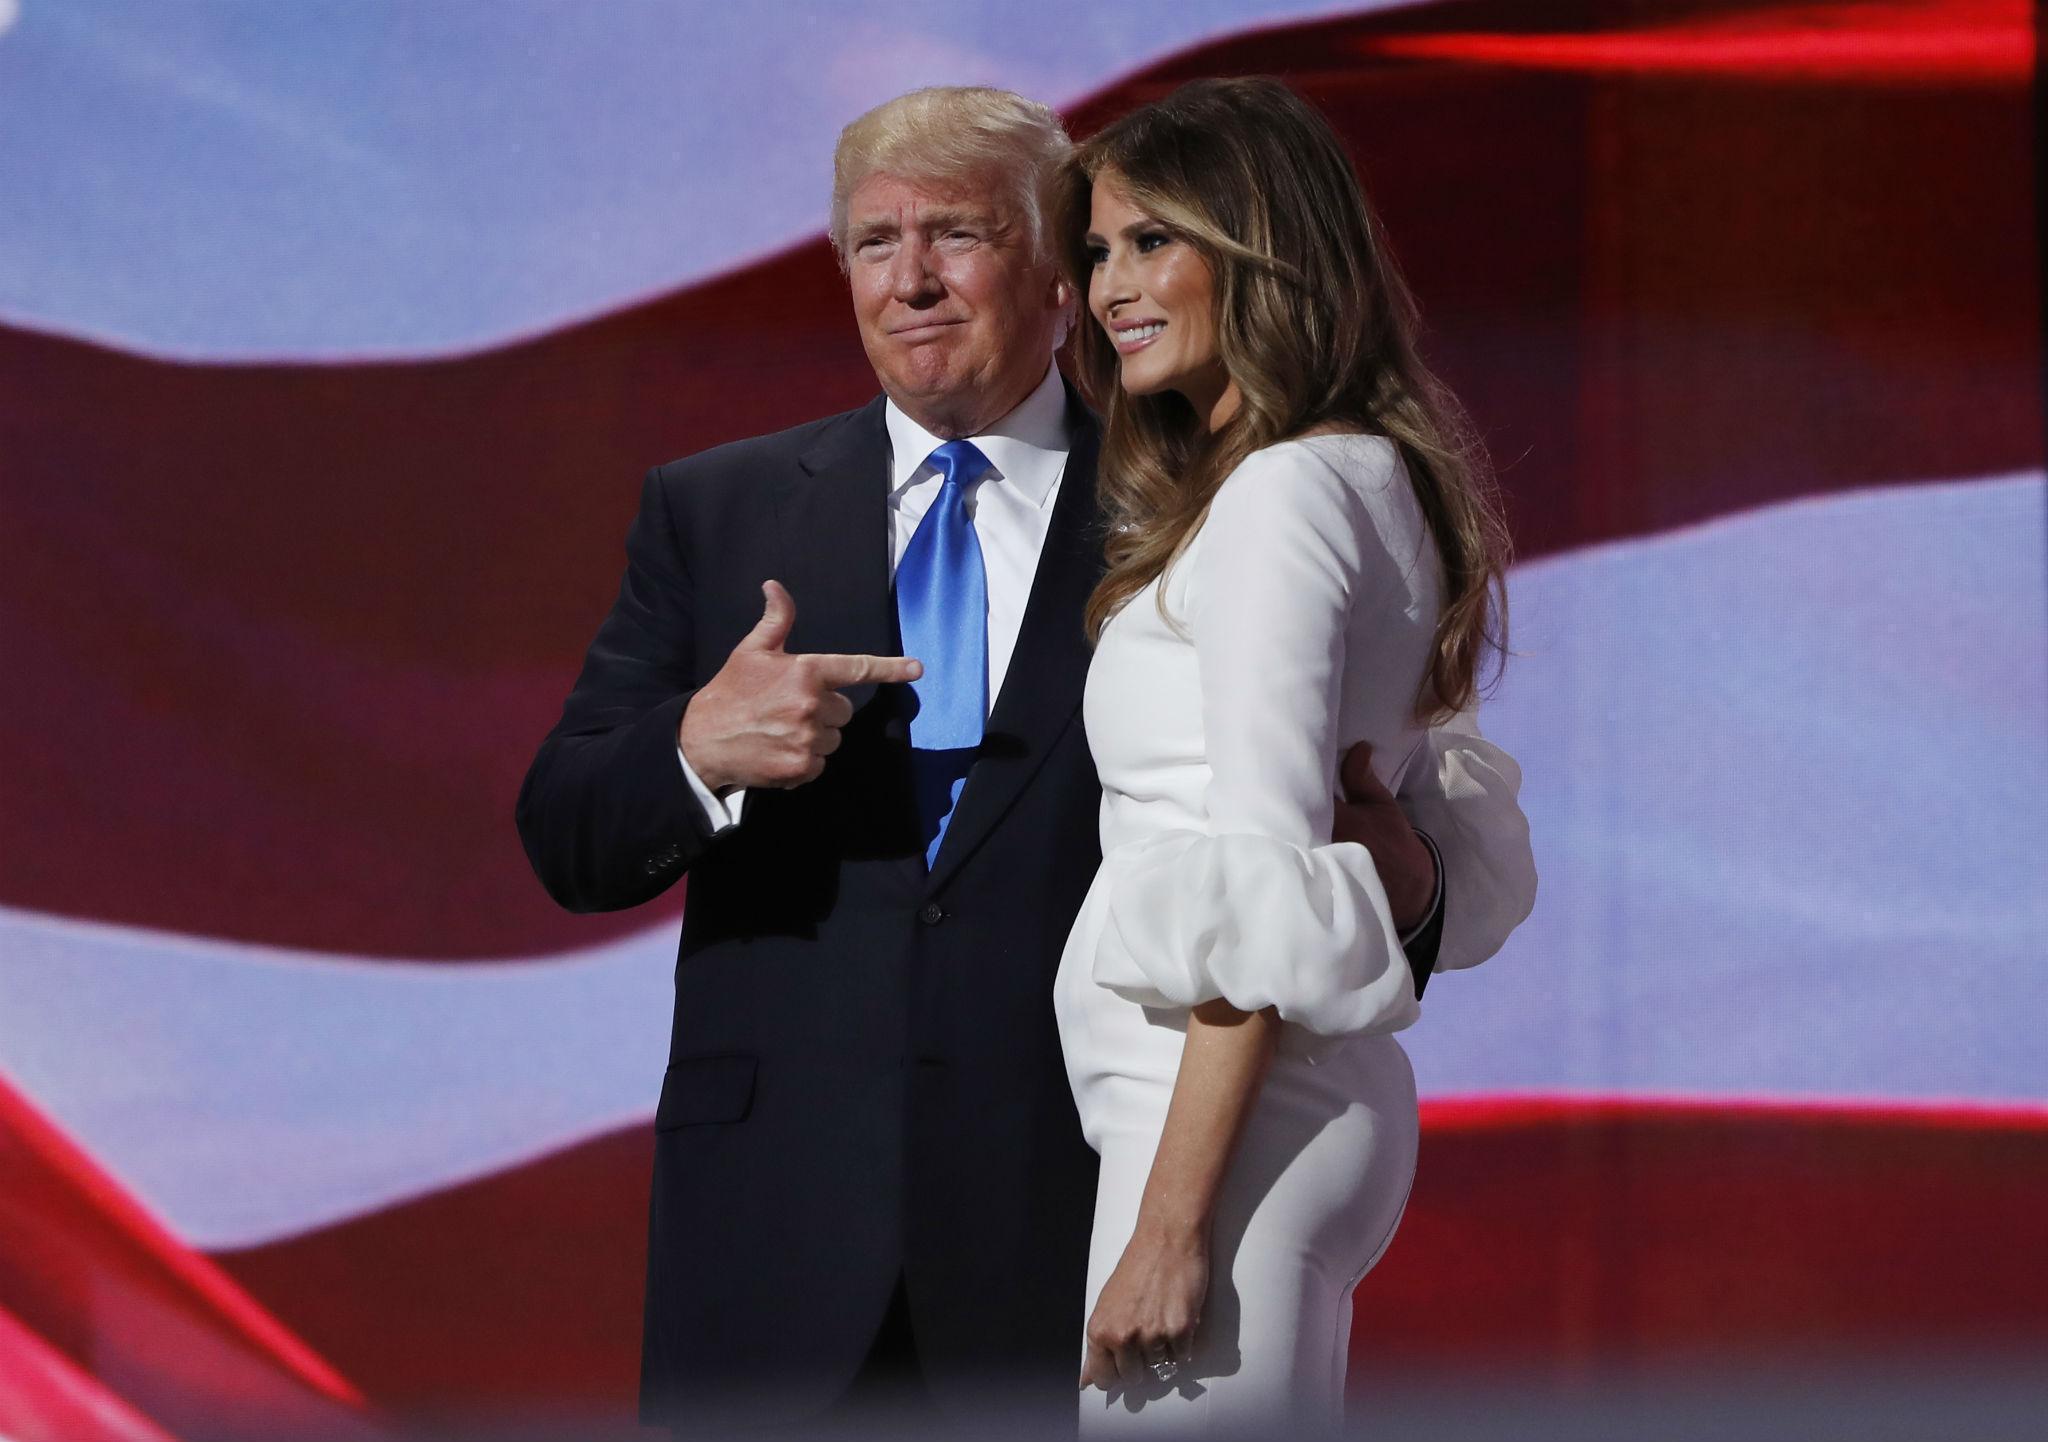 Melania Trump had barely finished her paean before the cries of plagiarism started